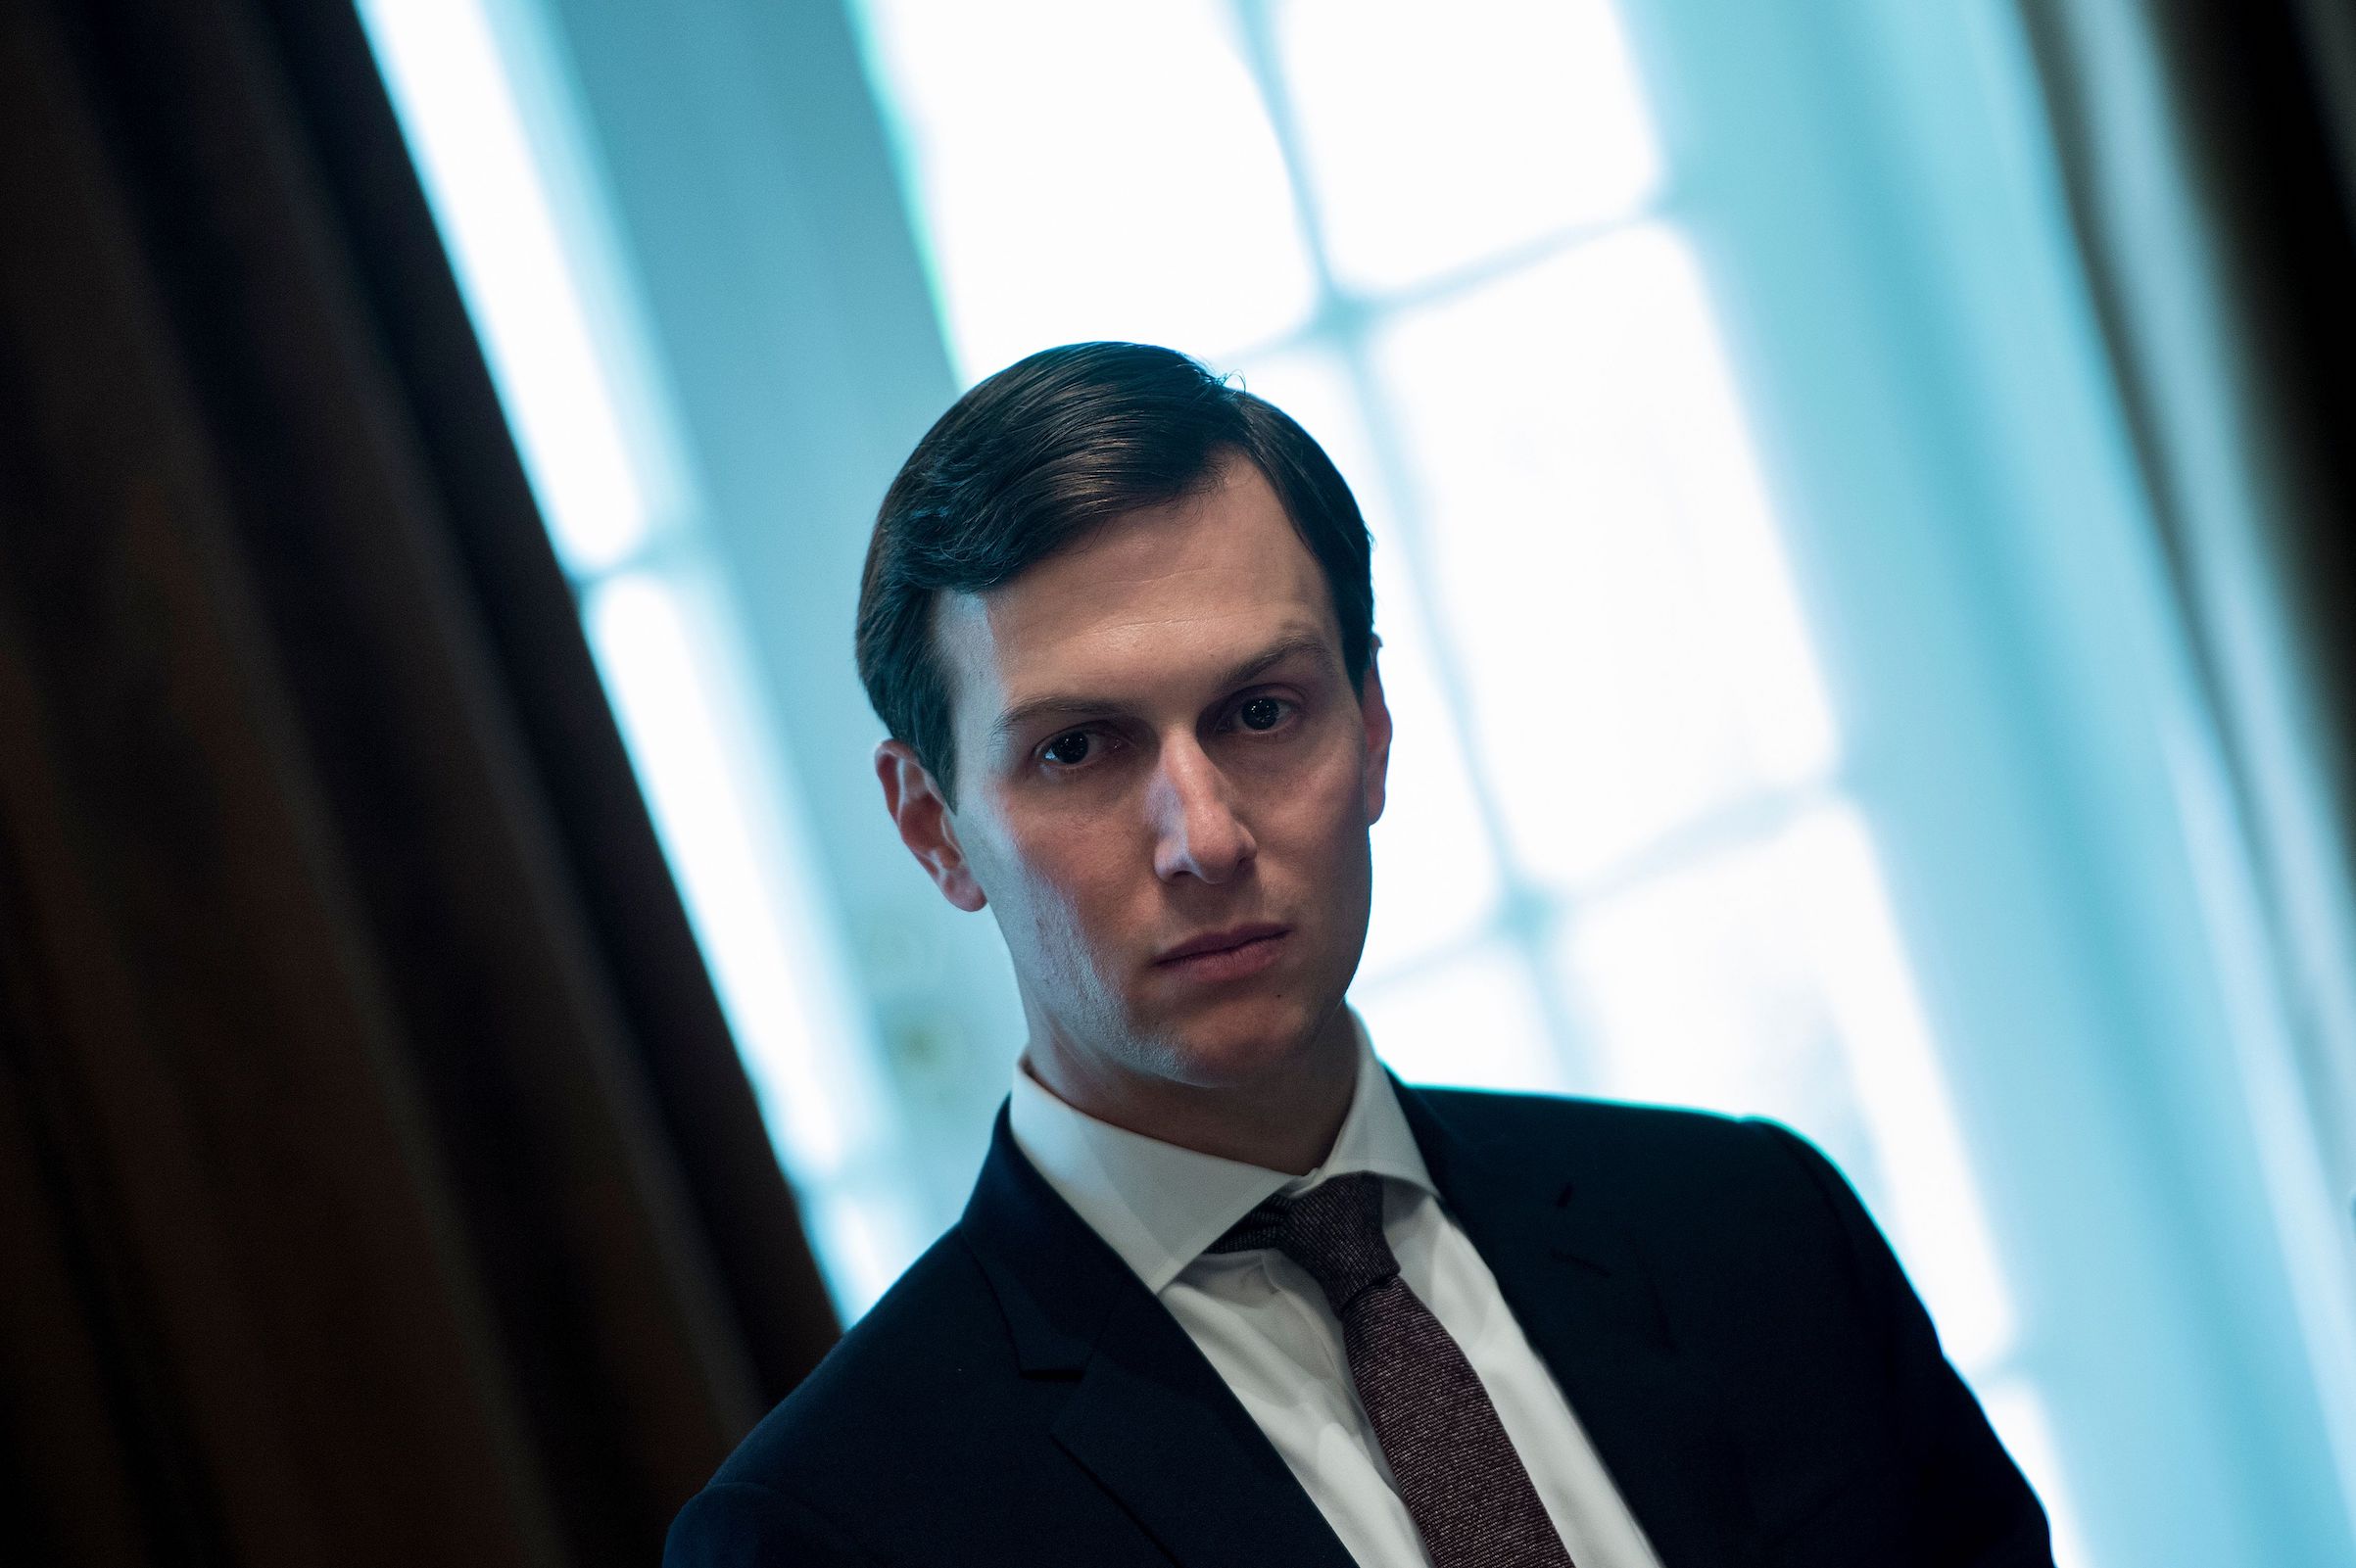 Senior Advisor Jared Kushner waits for a meeting with Prime Minister of Malaysia Najib Razak, U.S. President Donald Trump and others in the Cabinet Room of the White House Sept. 12, 2017 in Washington, D/C. / AFP PHOTO / Brendan Smialowski        (Photo credit should read BRENDAN SMIALOWSKI/AFP/Getty Images) (Brendan Smialowski&mdash;AFP/Getty Images)